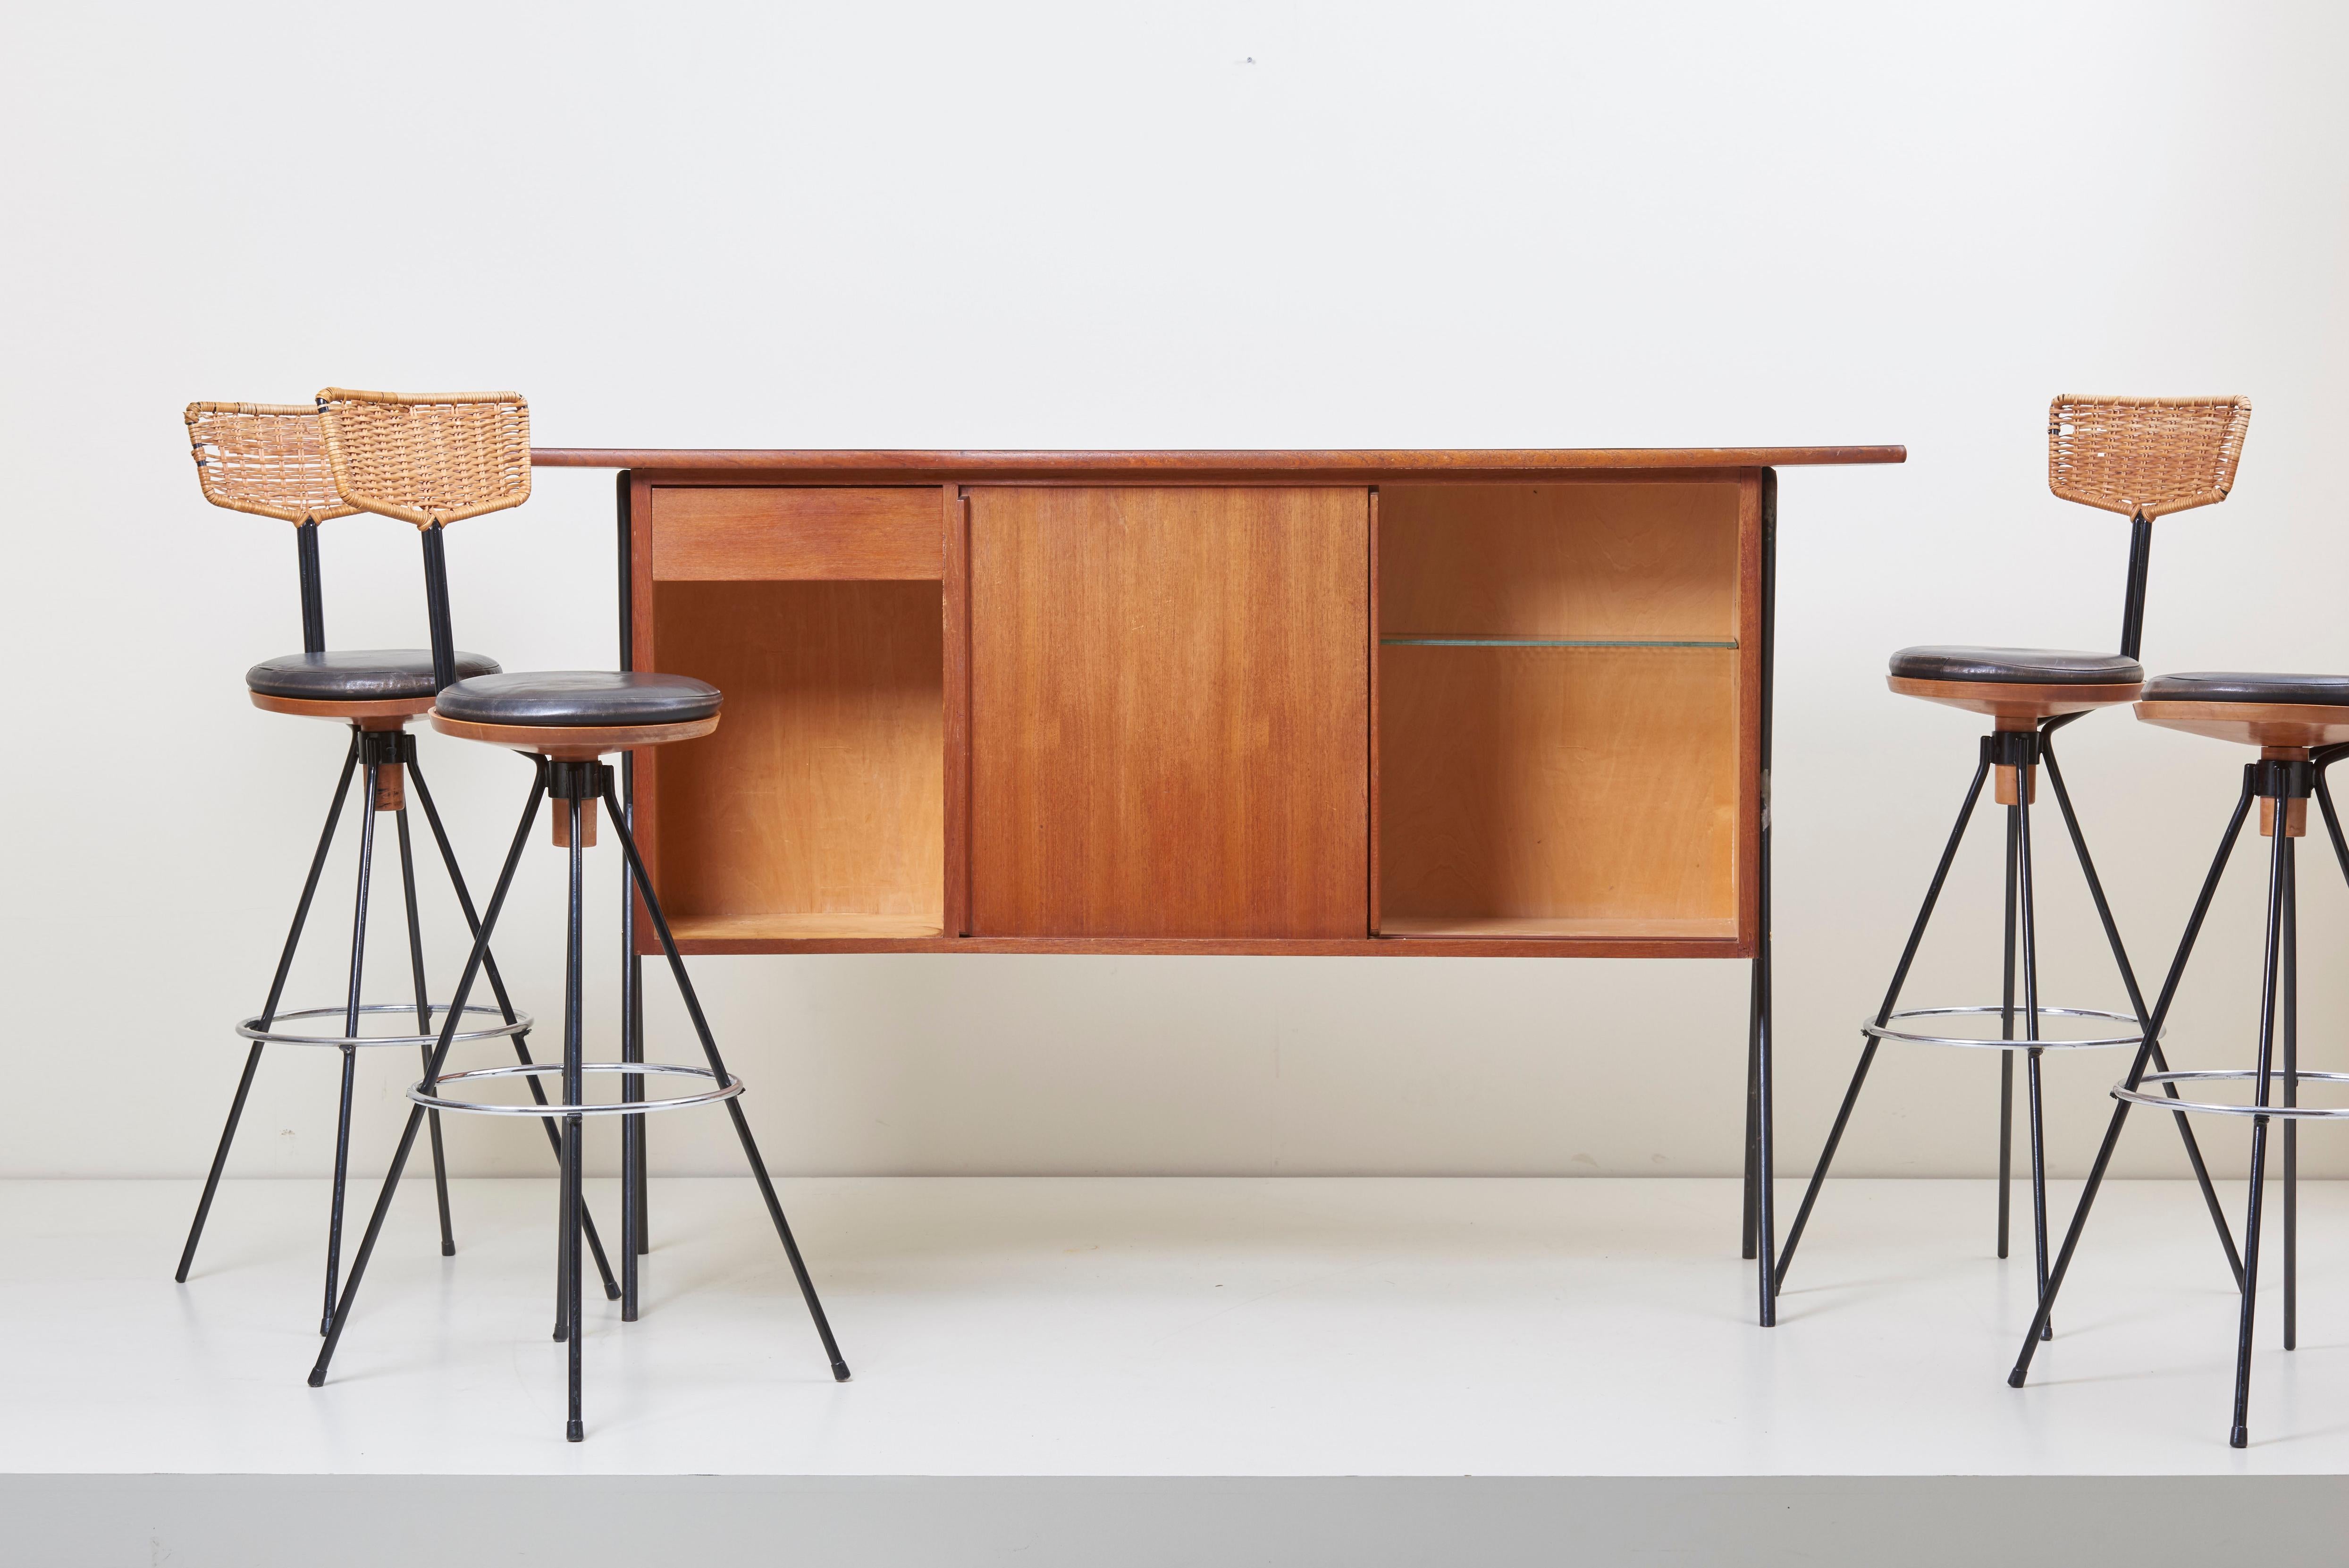 House Bar and Four Bar Stools by Prof. Herta-Maria Witzemann for Erwin Behr 1